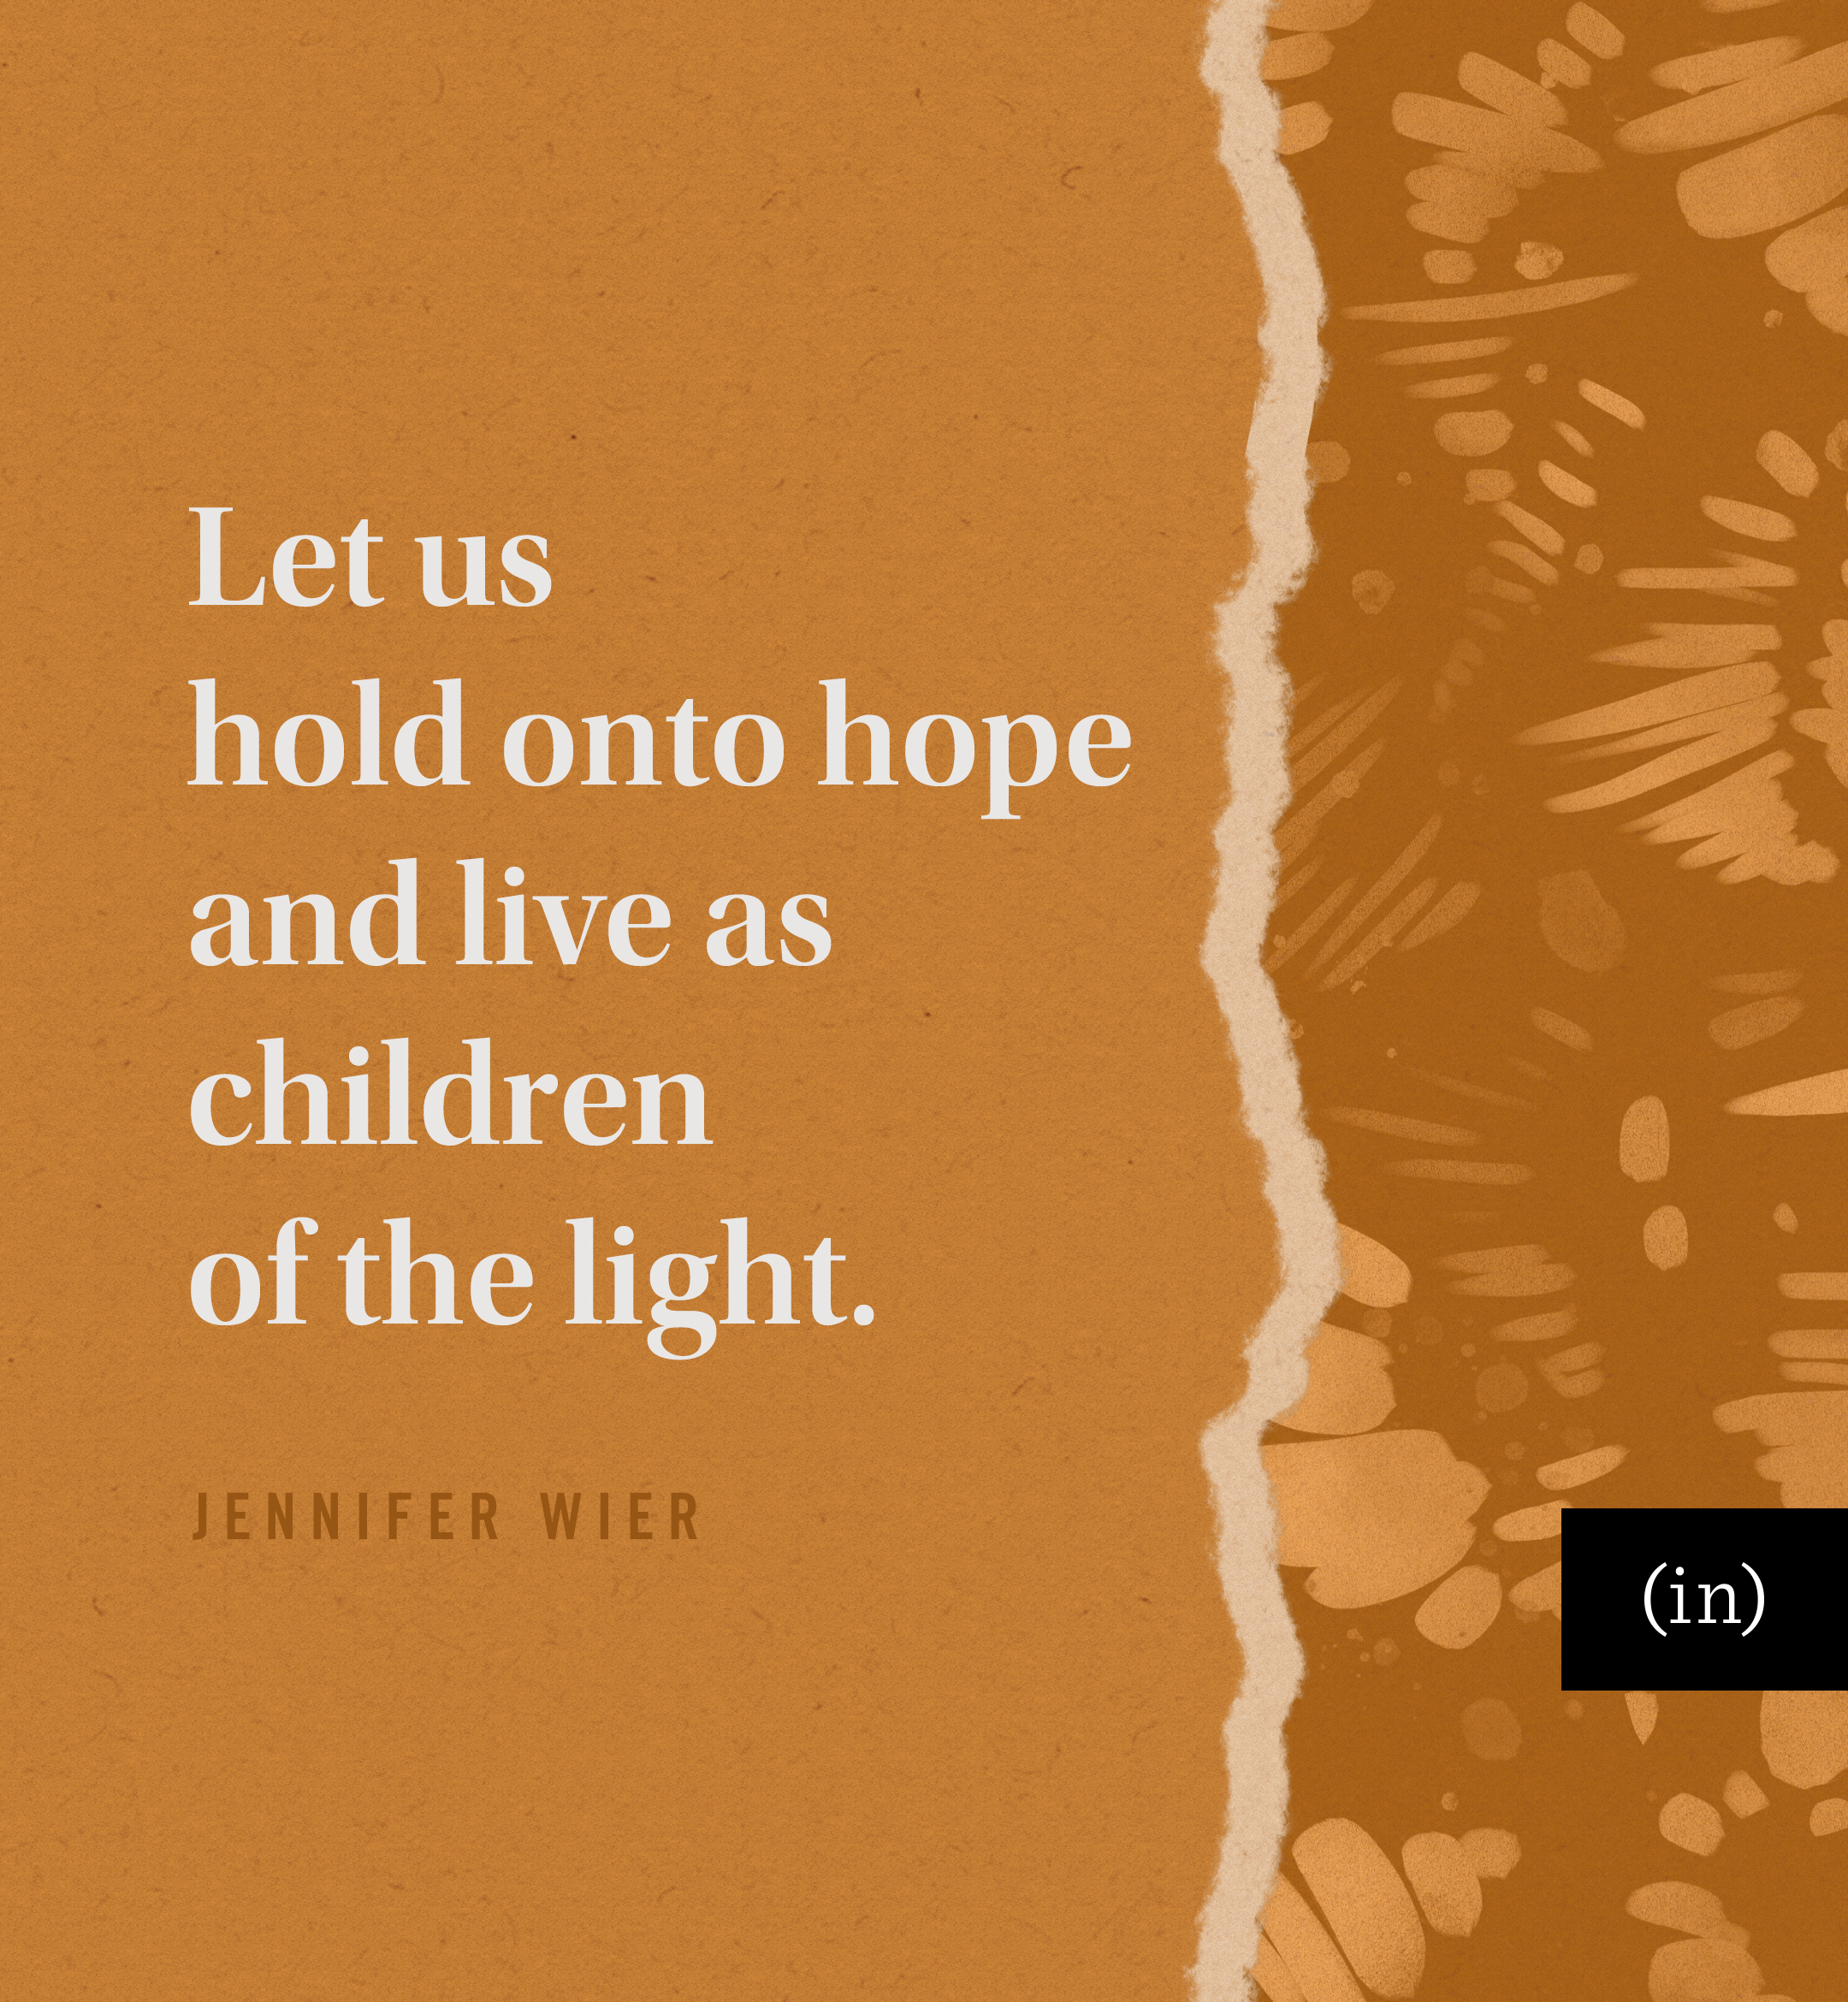 Let us hold onto hope and live as children of the light. -Jennifer Wire